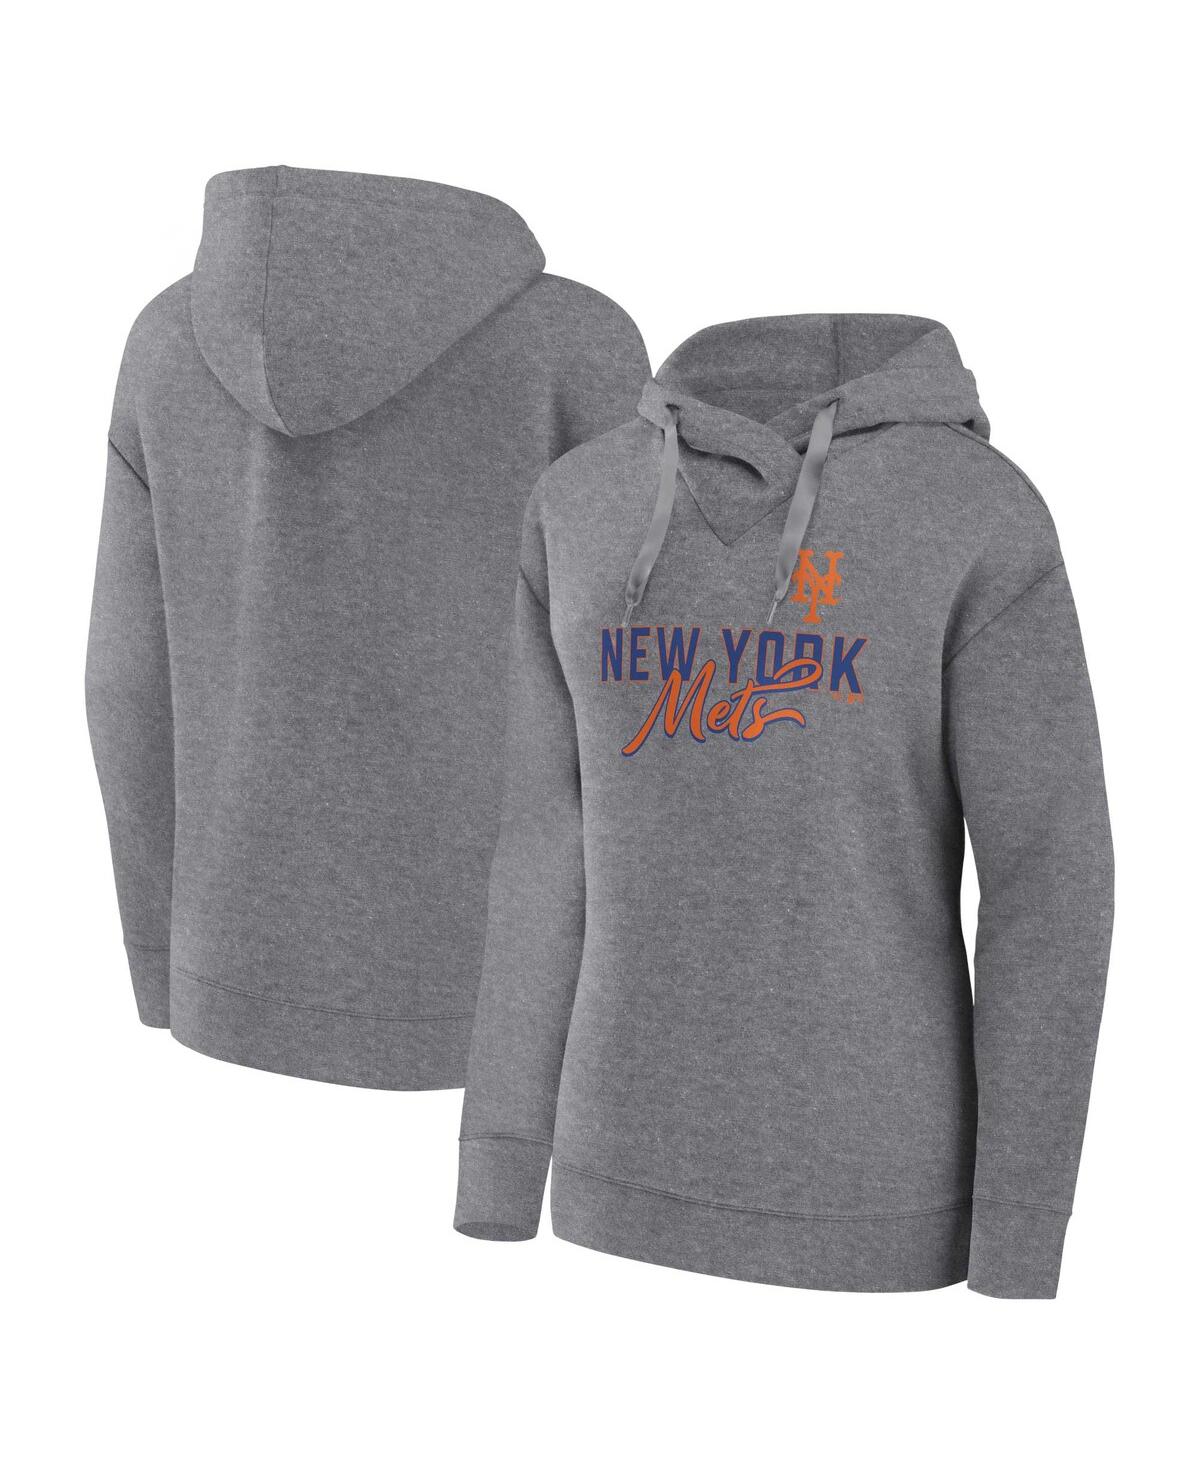 PROFILE WOMEN'S PROFILE HEATHER GRAY NEW YORK METS PLUS SIZE PULLOVER HOODIE